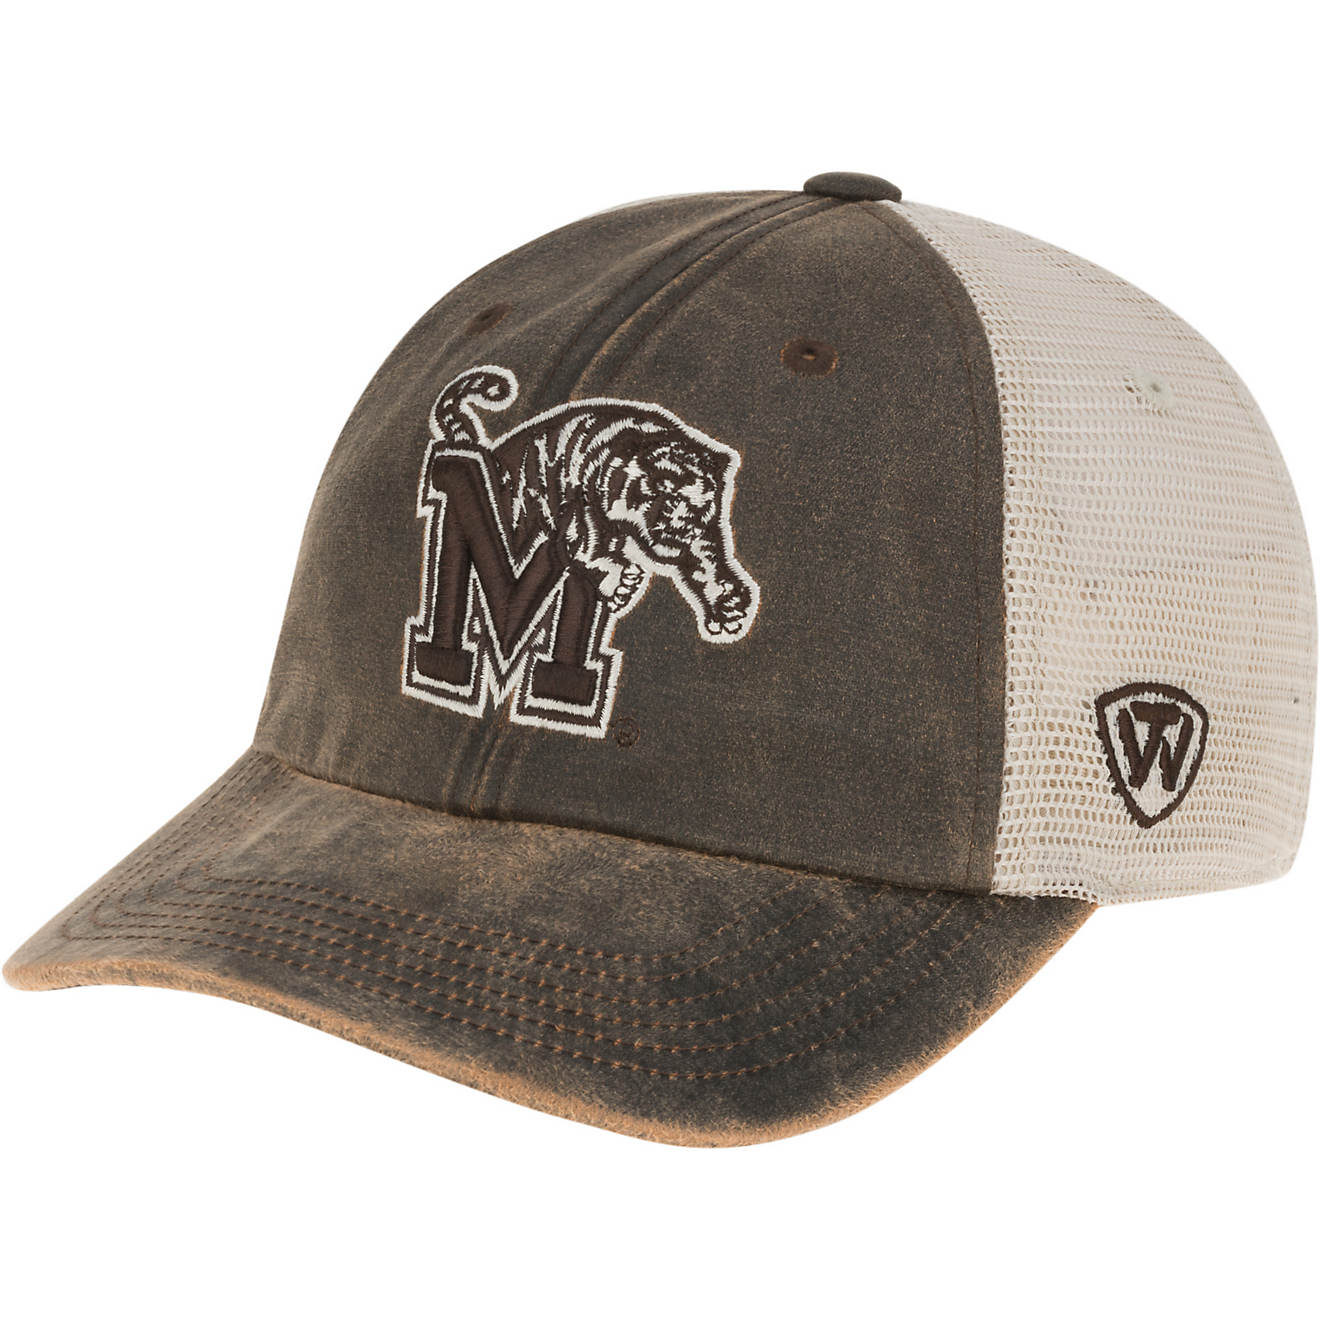 Top of the World Adults' University of Memphis ScatMesh Cap                                                                      - view number 1